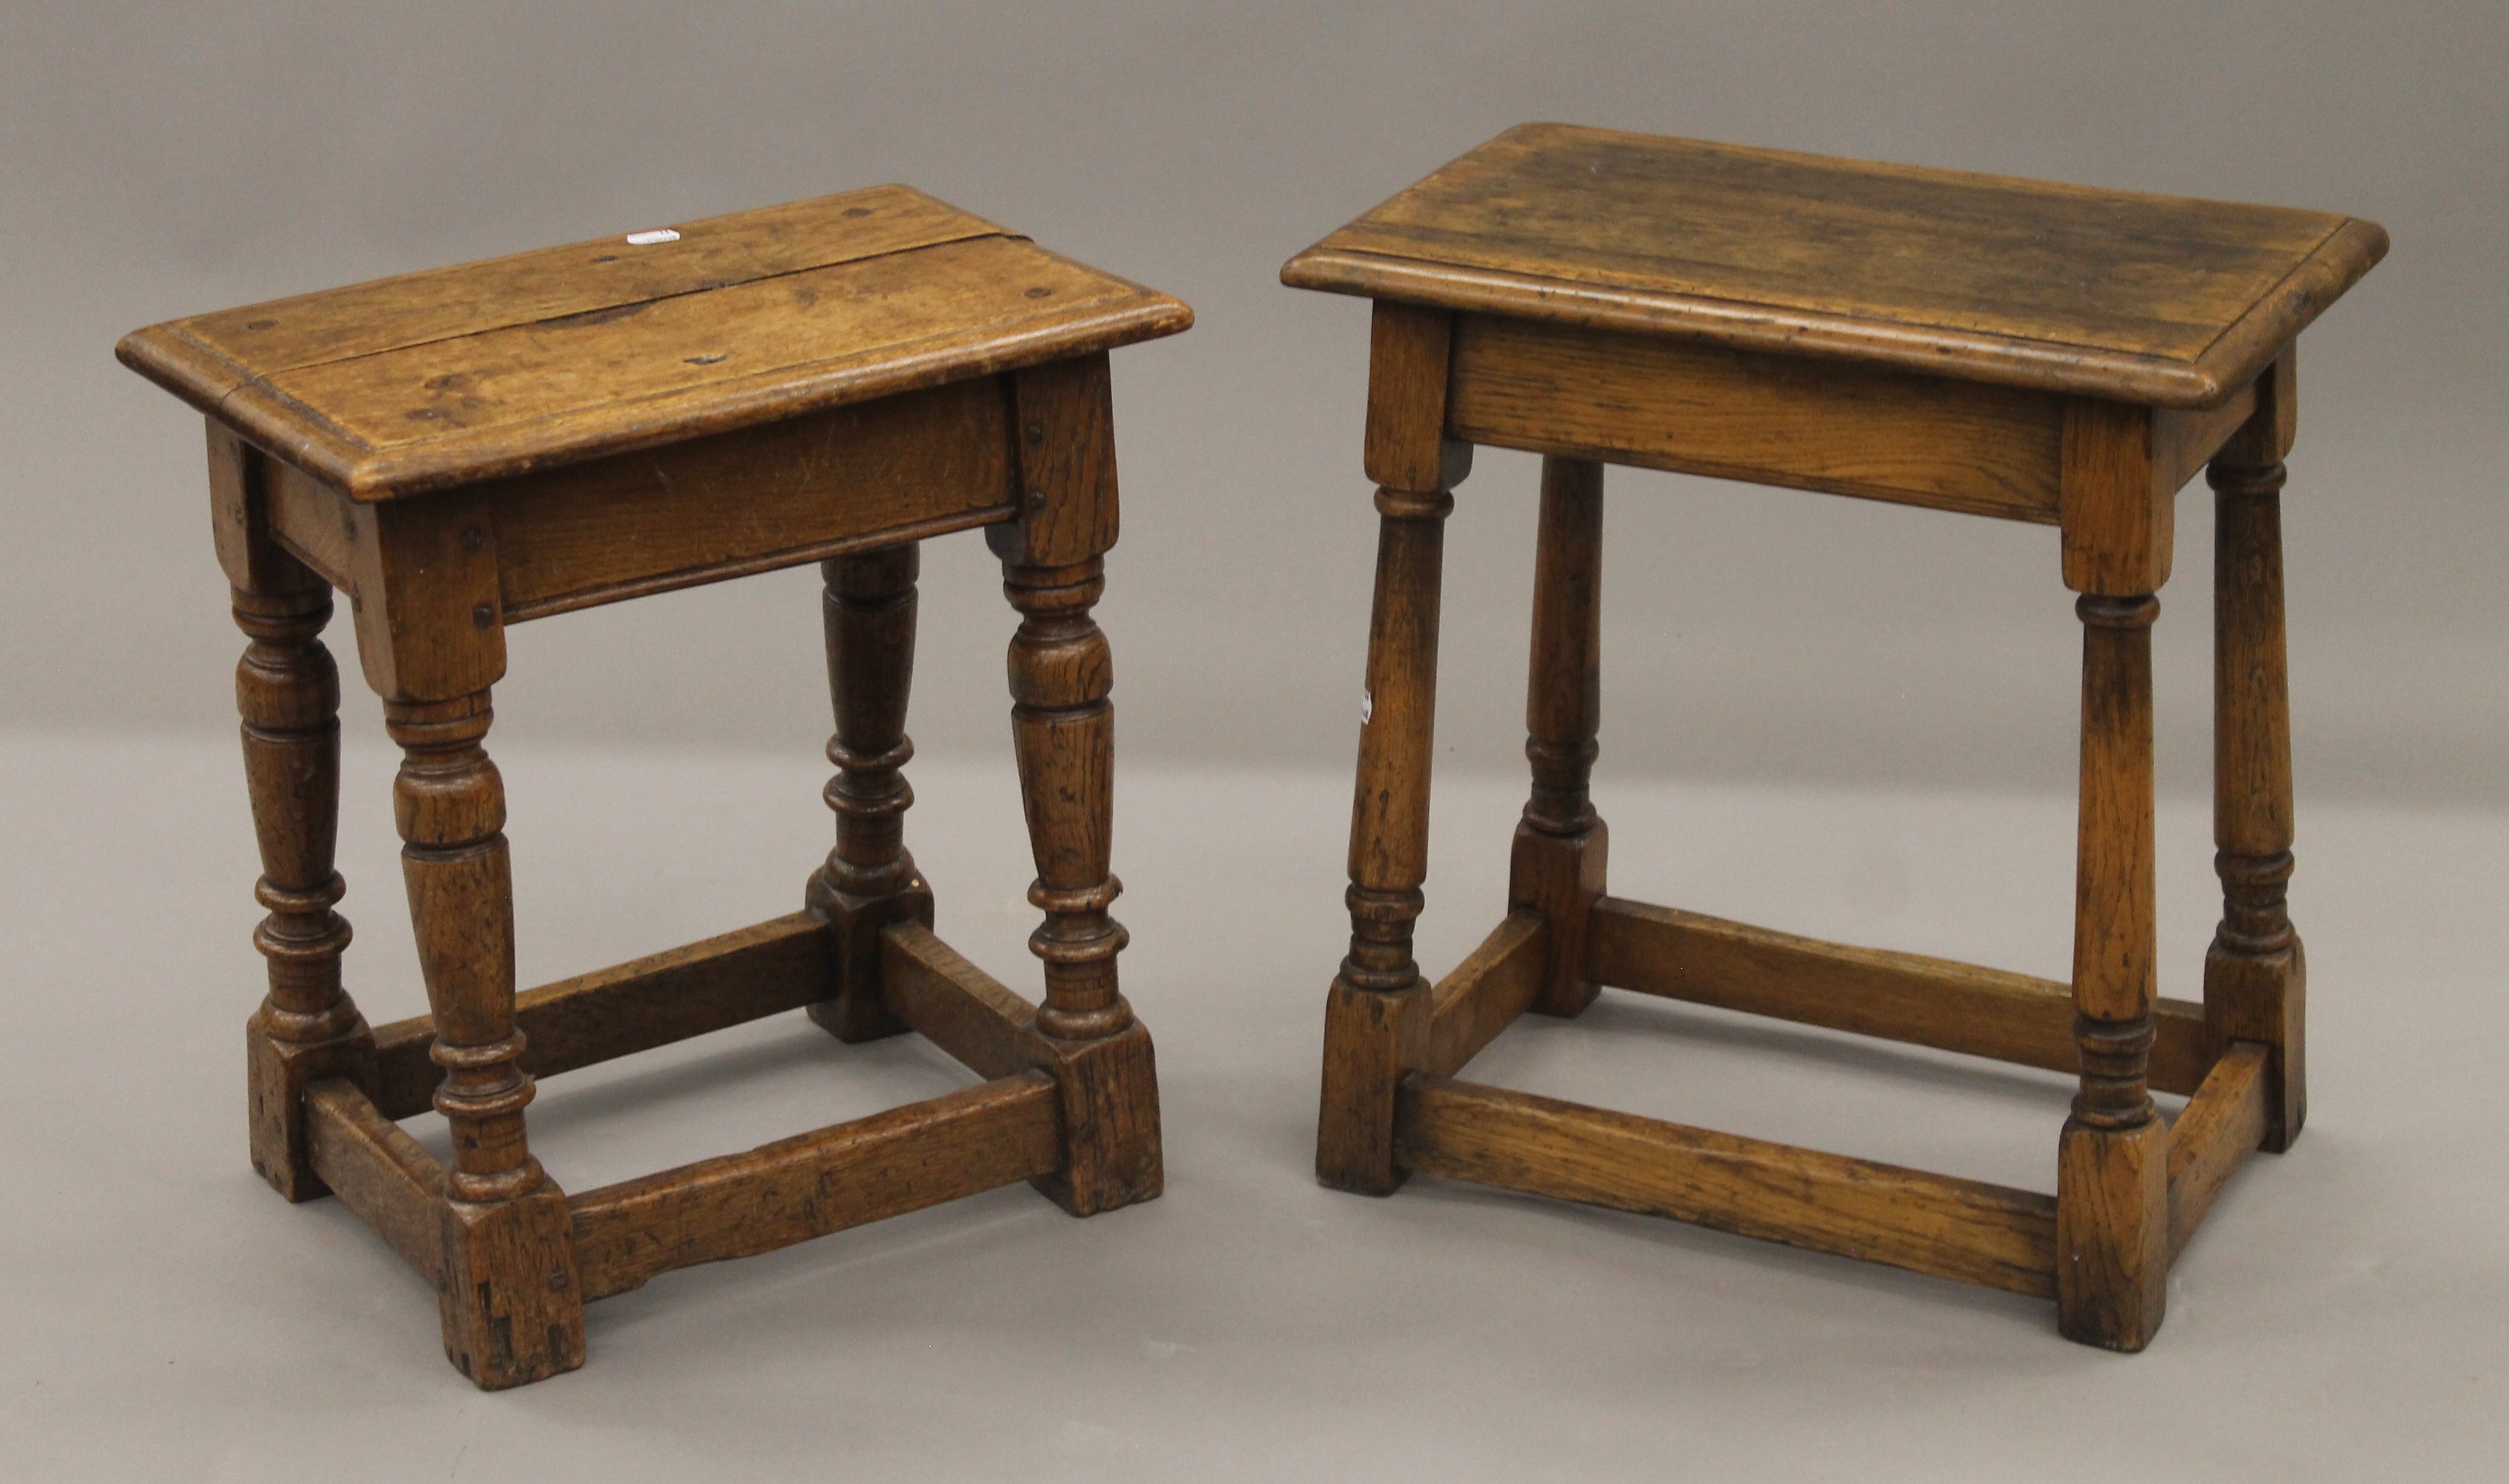 Two oak joint stools. The largest 46 cm long.